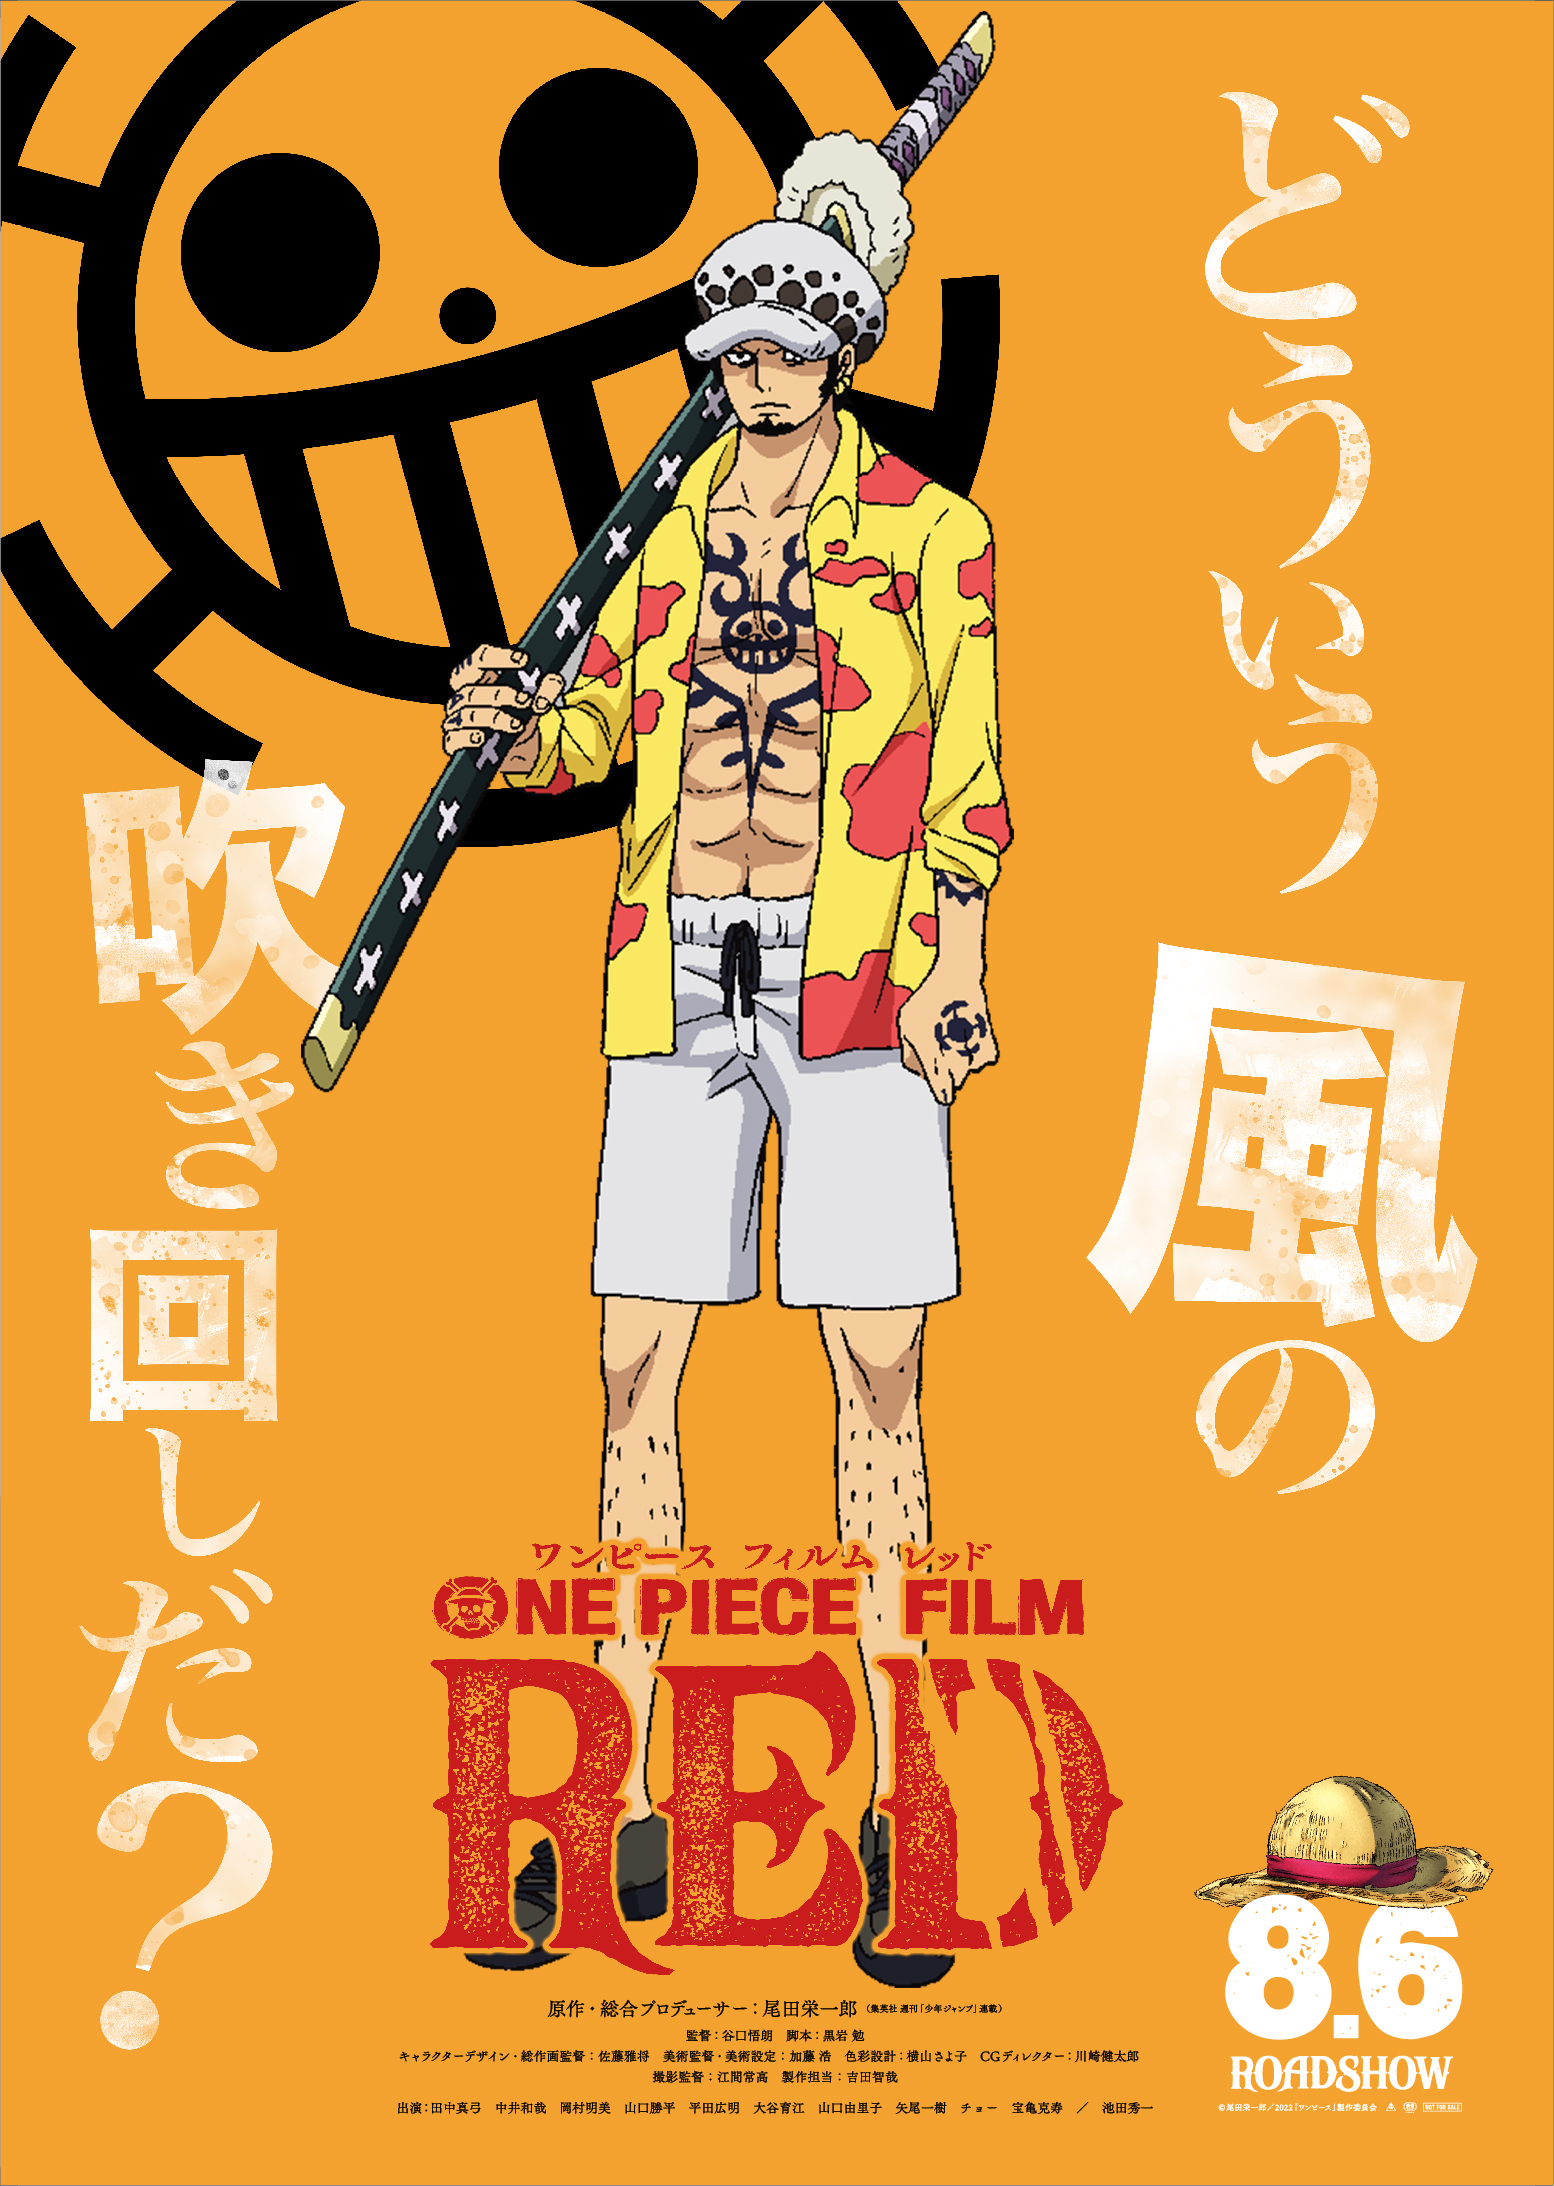 Trafalgar Law on X: Characters from One Piece Gold film